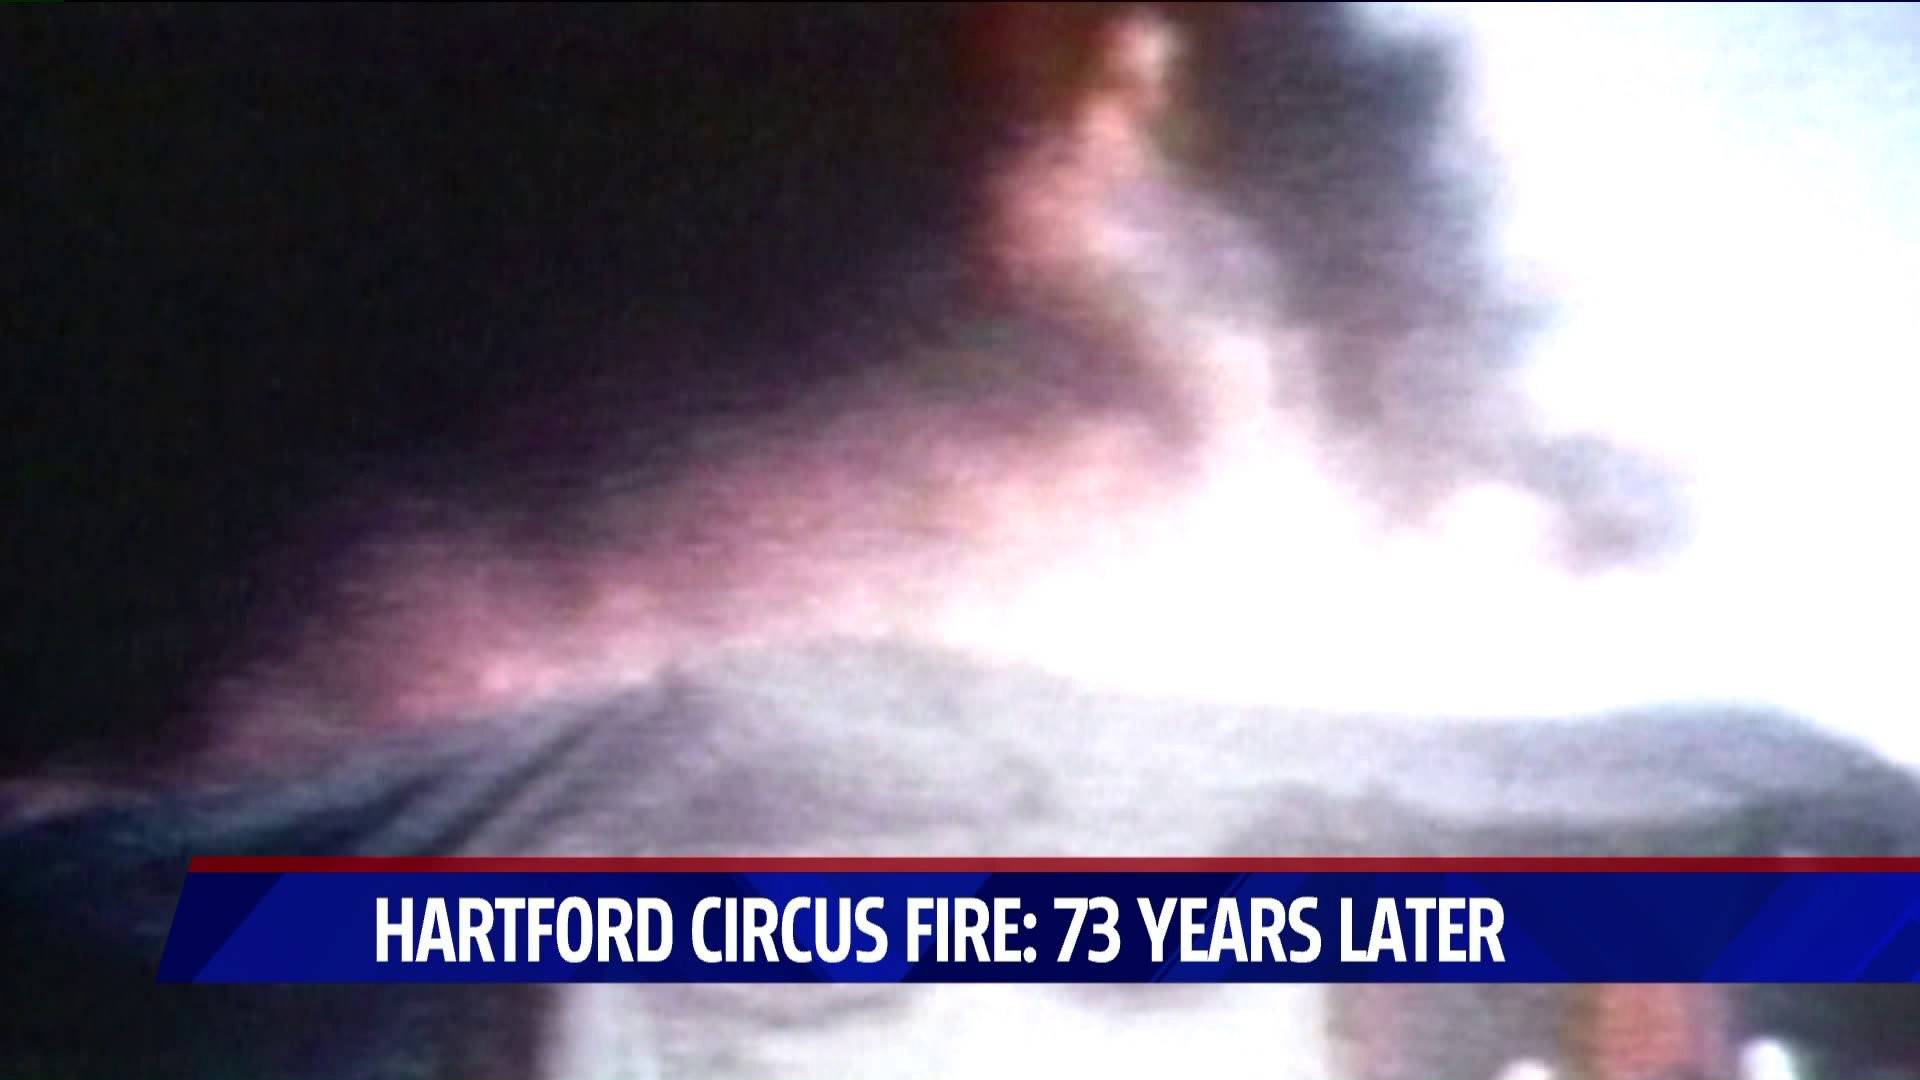 Remembering the Hartford Circus Fire